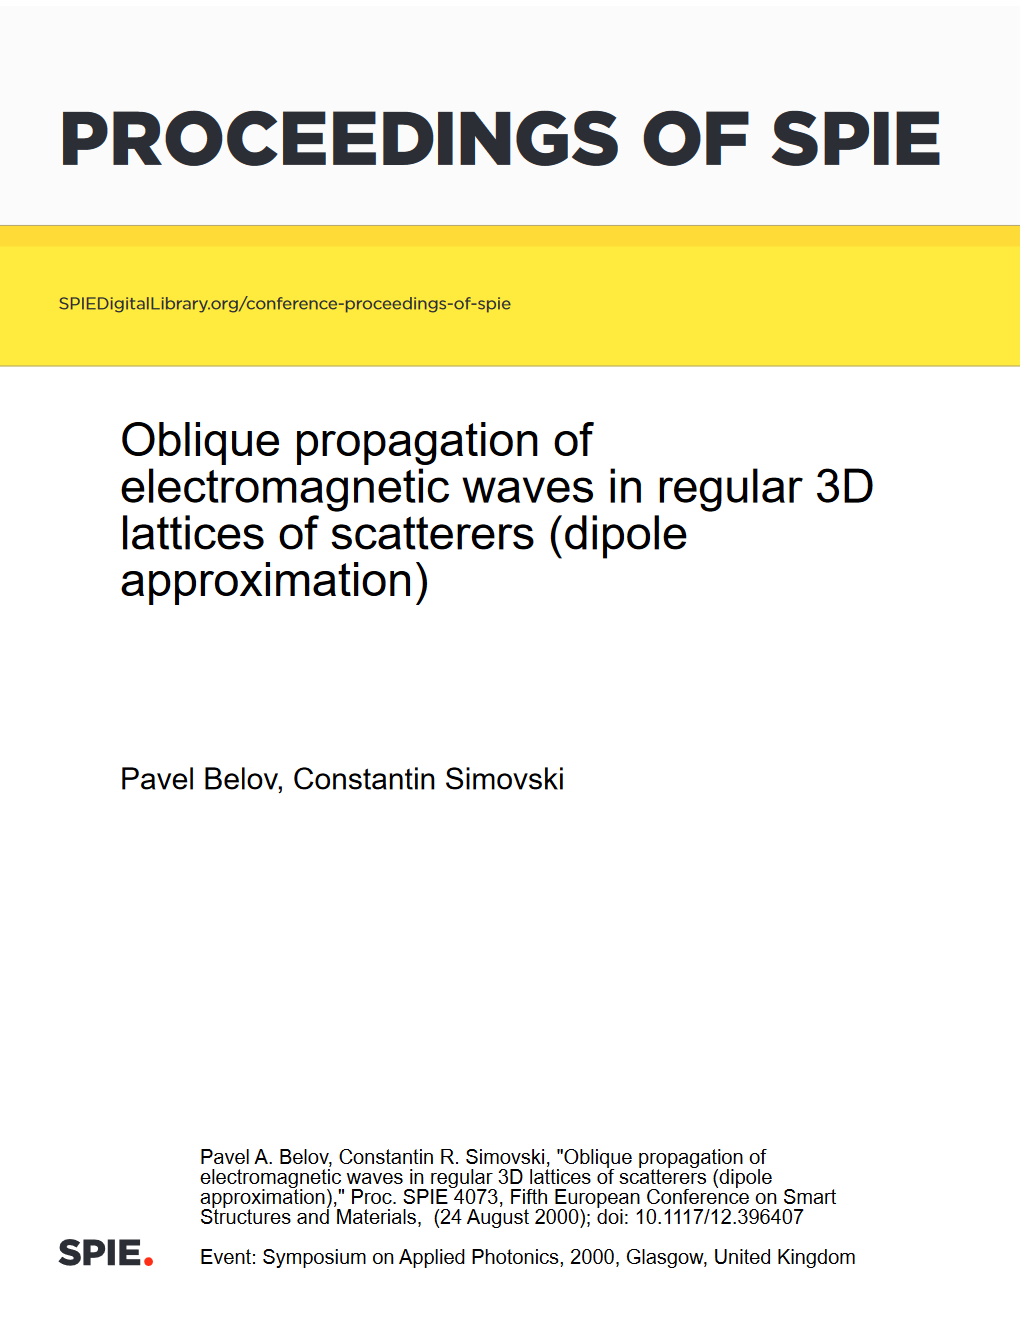 Oblique propagation of electromagnetic waves in regular 3D lattices of scatterers (dipole approximation)